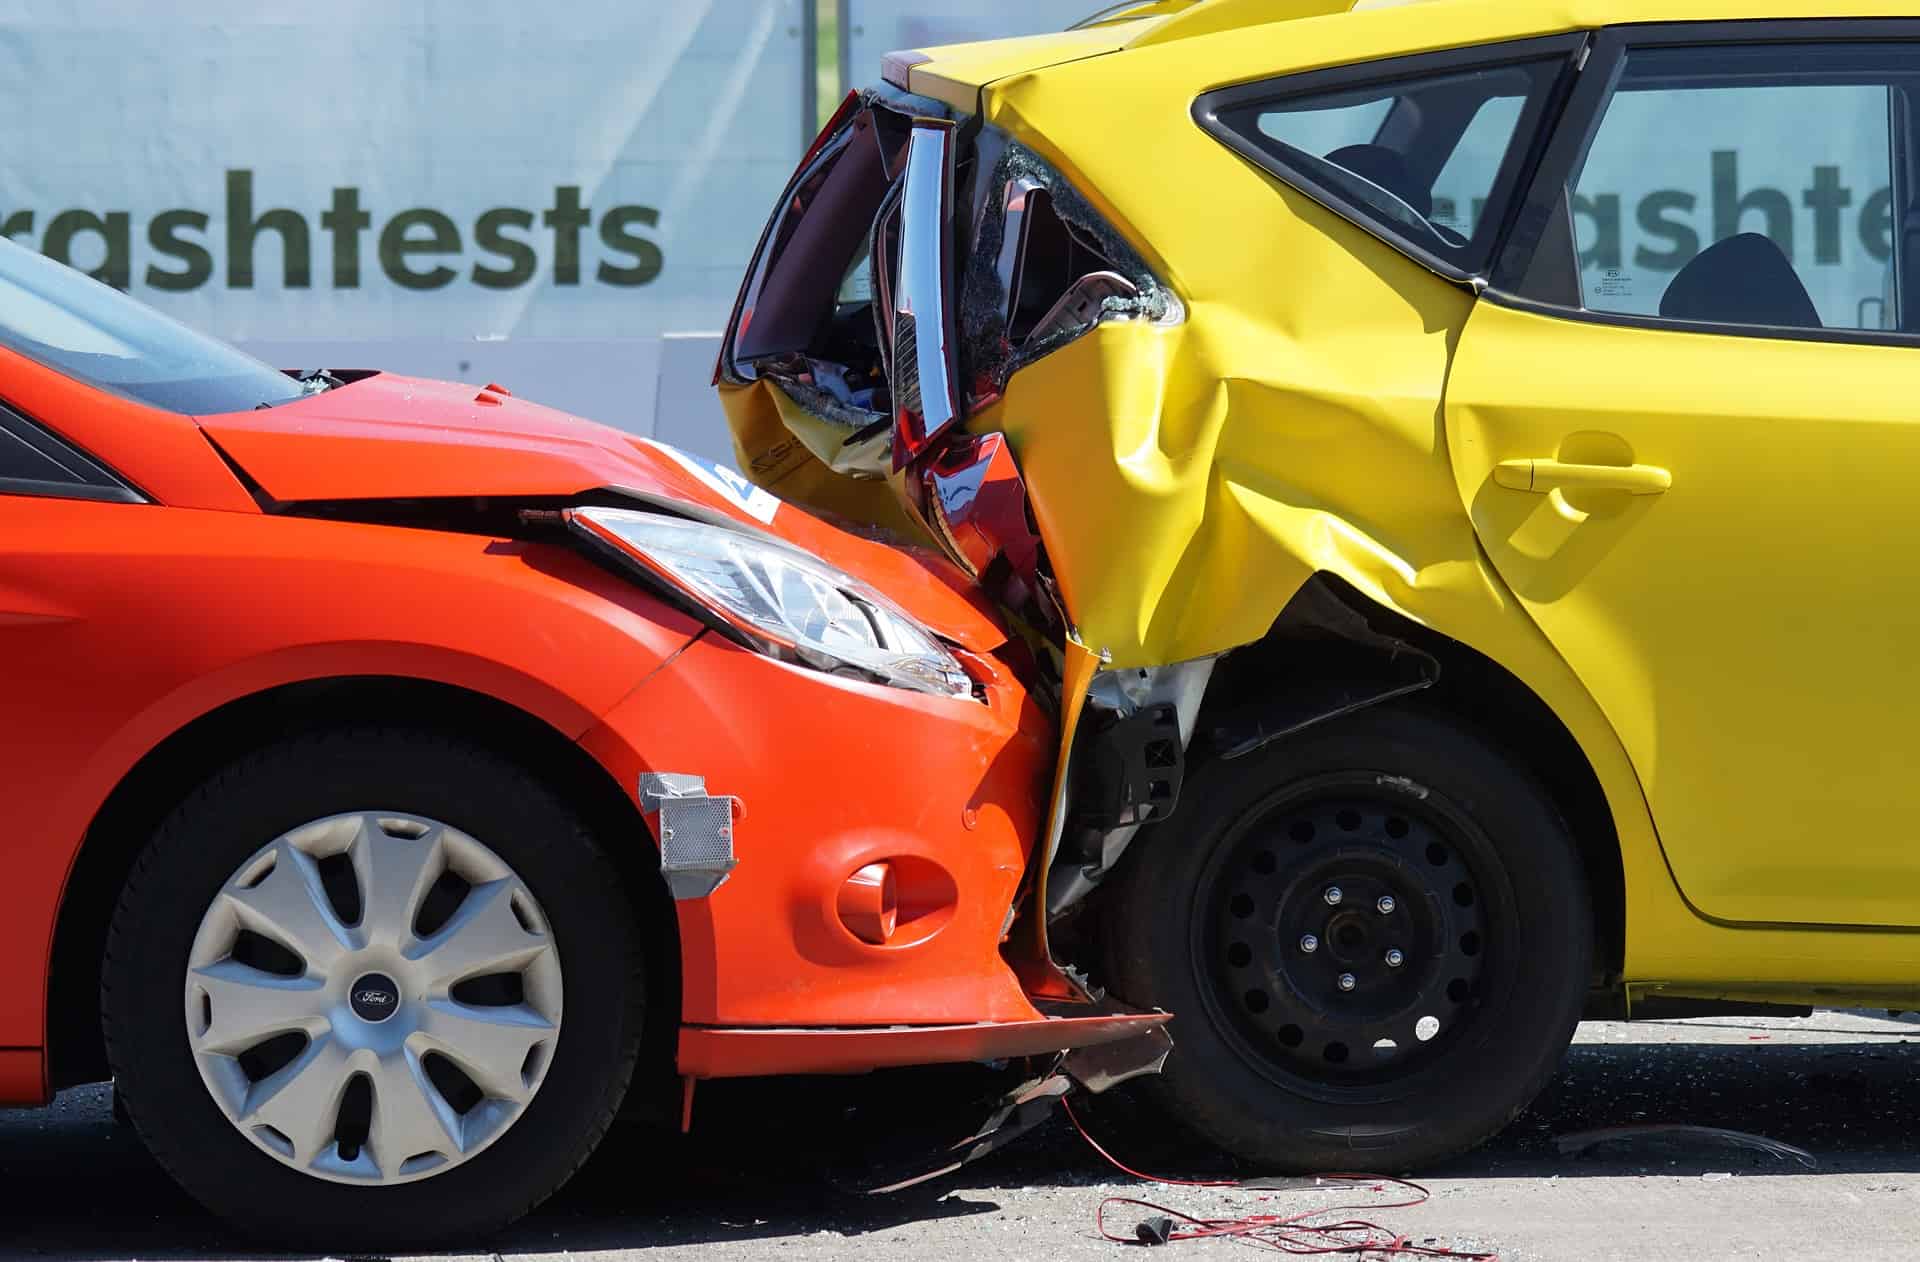 How Vehicle Safety Ratings are Determined